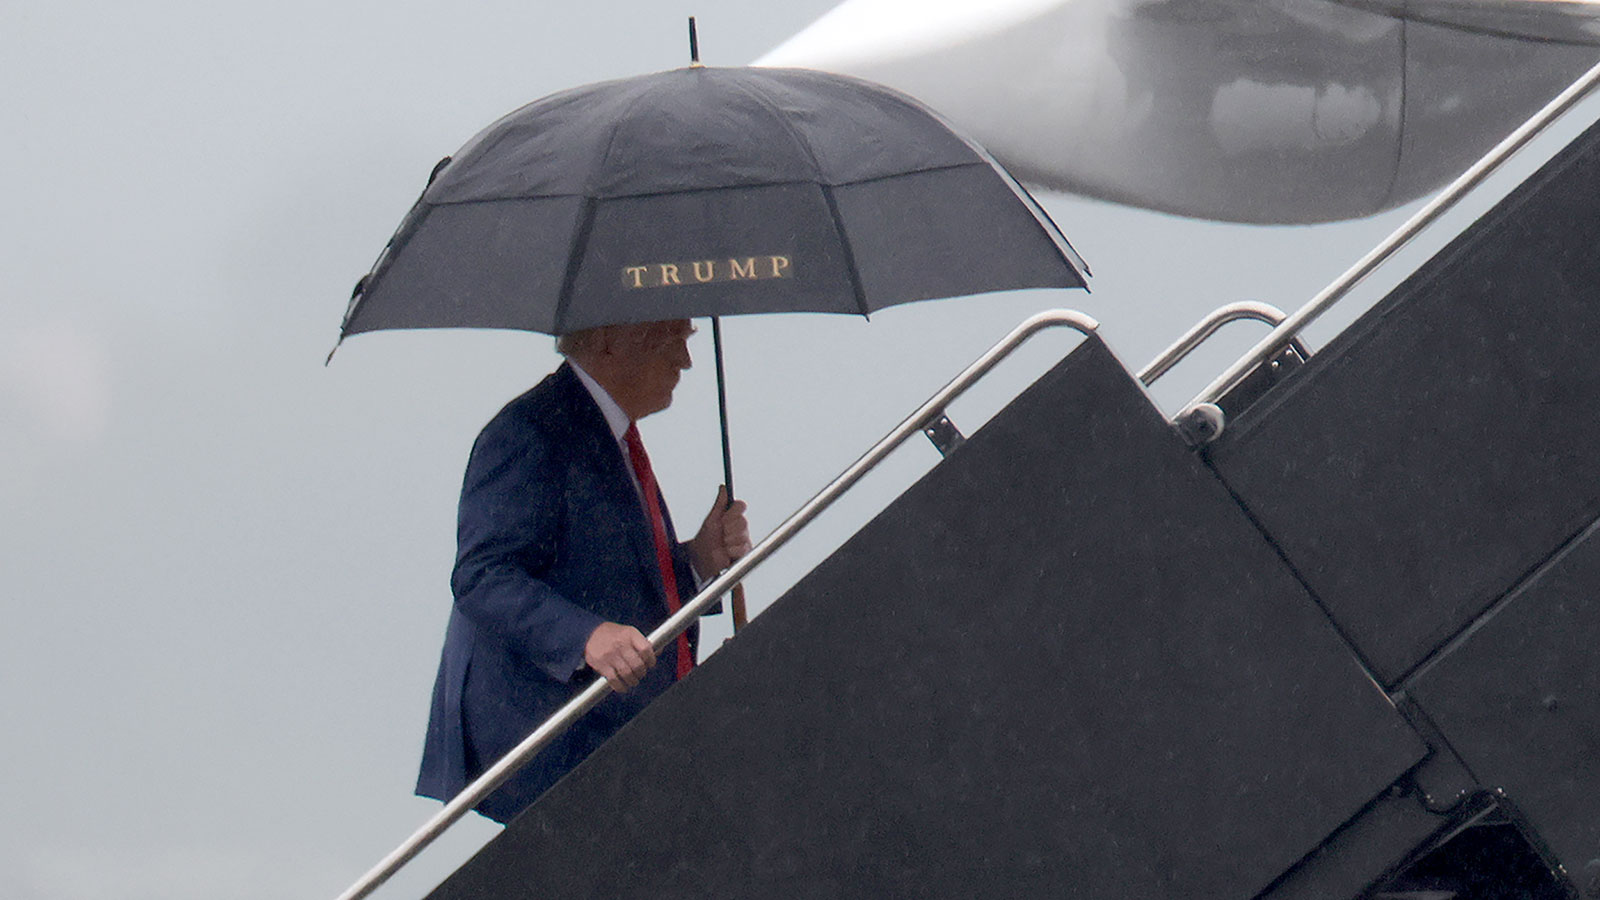 Trump boards his plane at Reagan National Airport on Thursday, August 3.